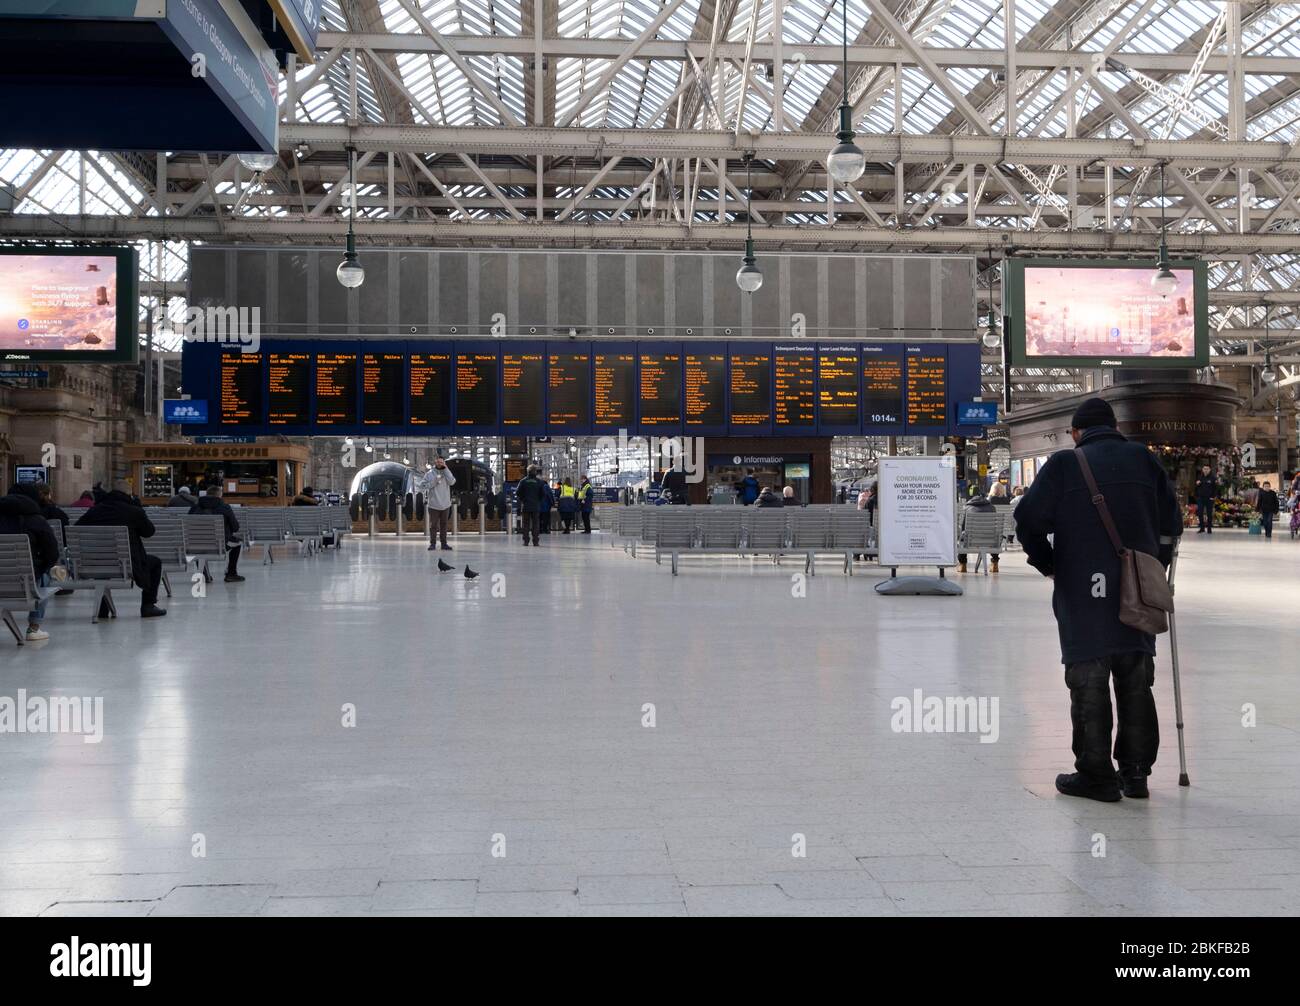 Government information sign in Glasgow's Central station during the Covid-19 lockdown. Stock Photo